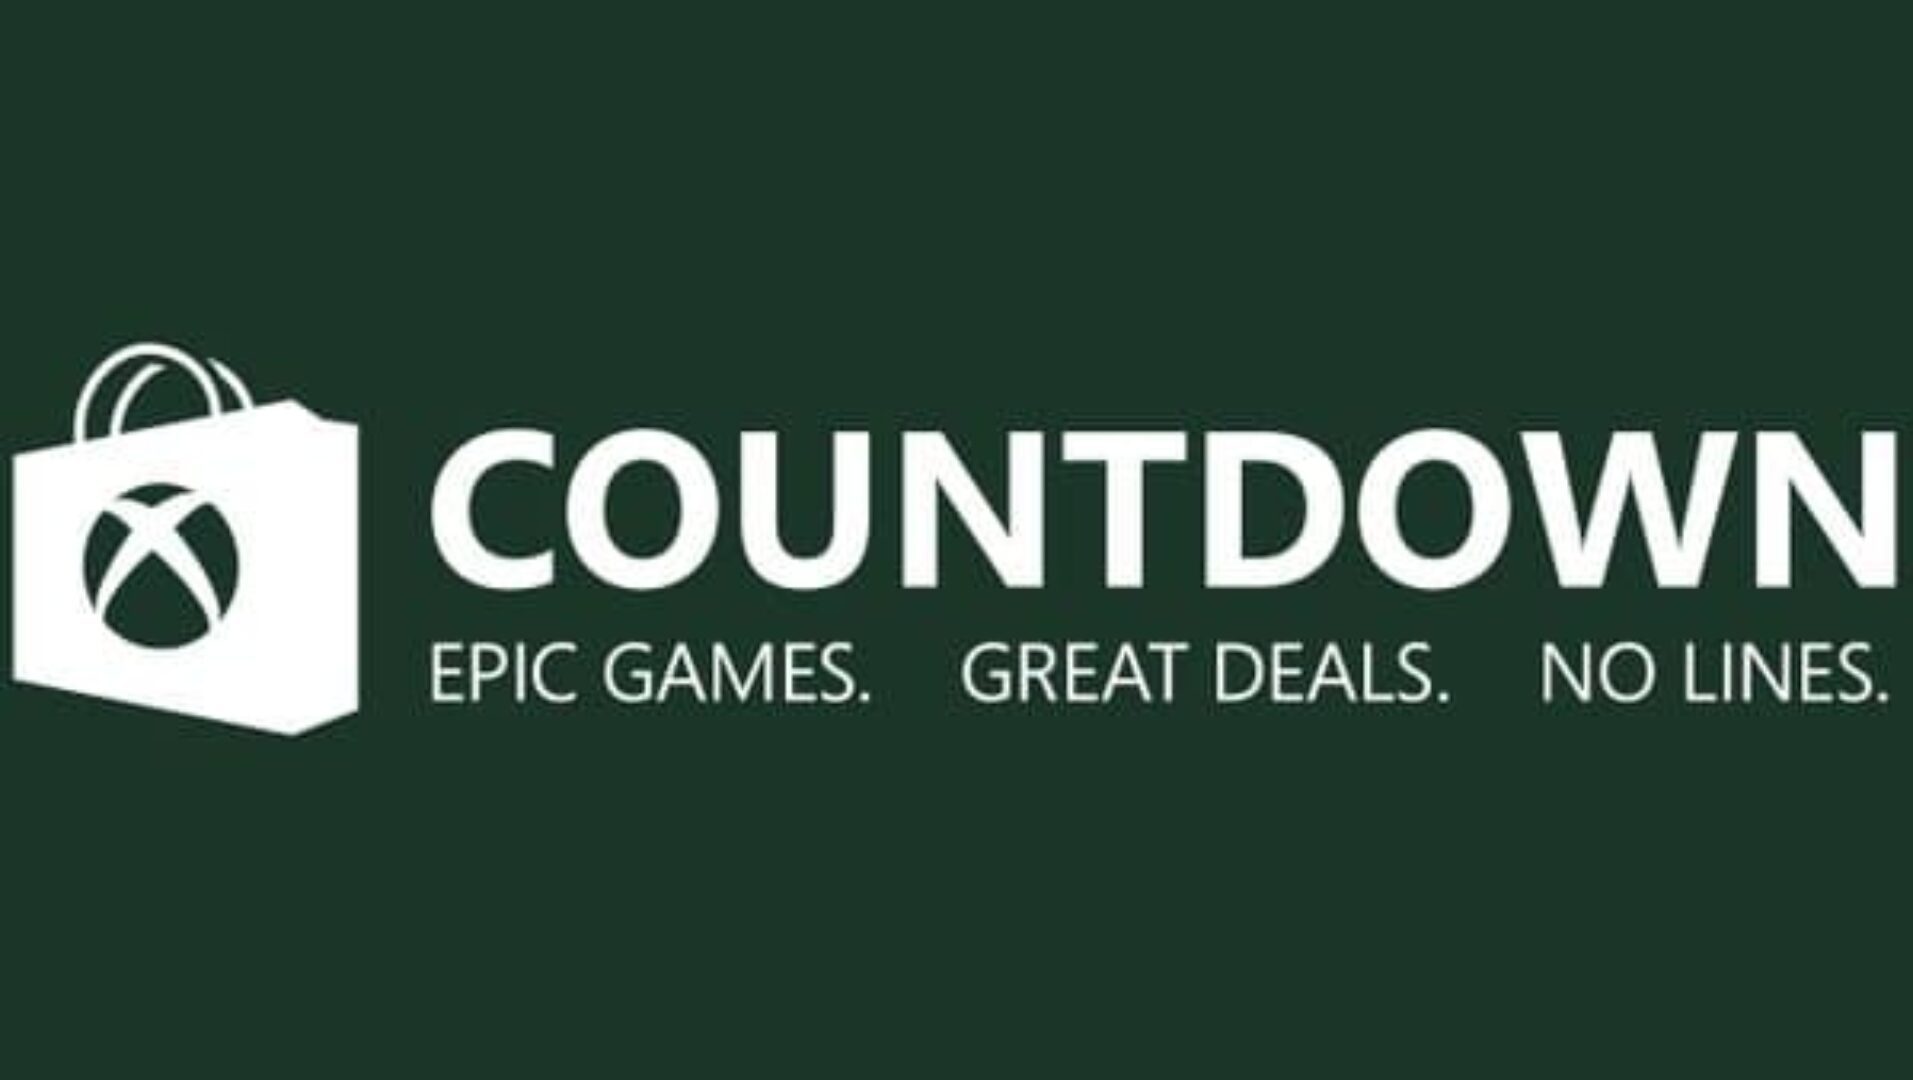 Xbox Biggest Sale Ever Continues with Week 2